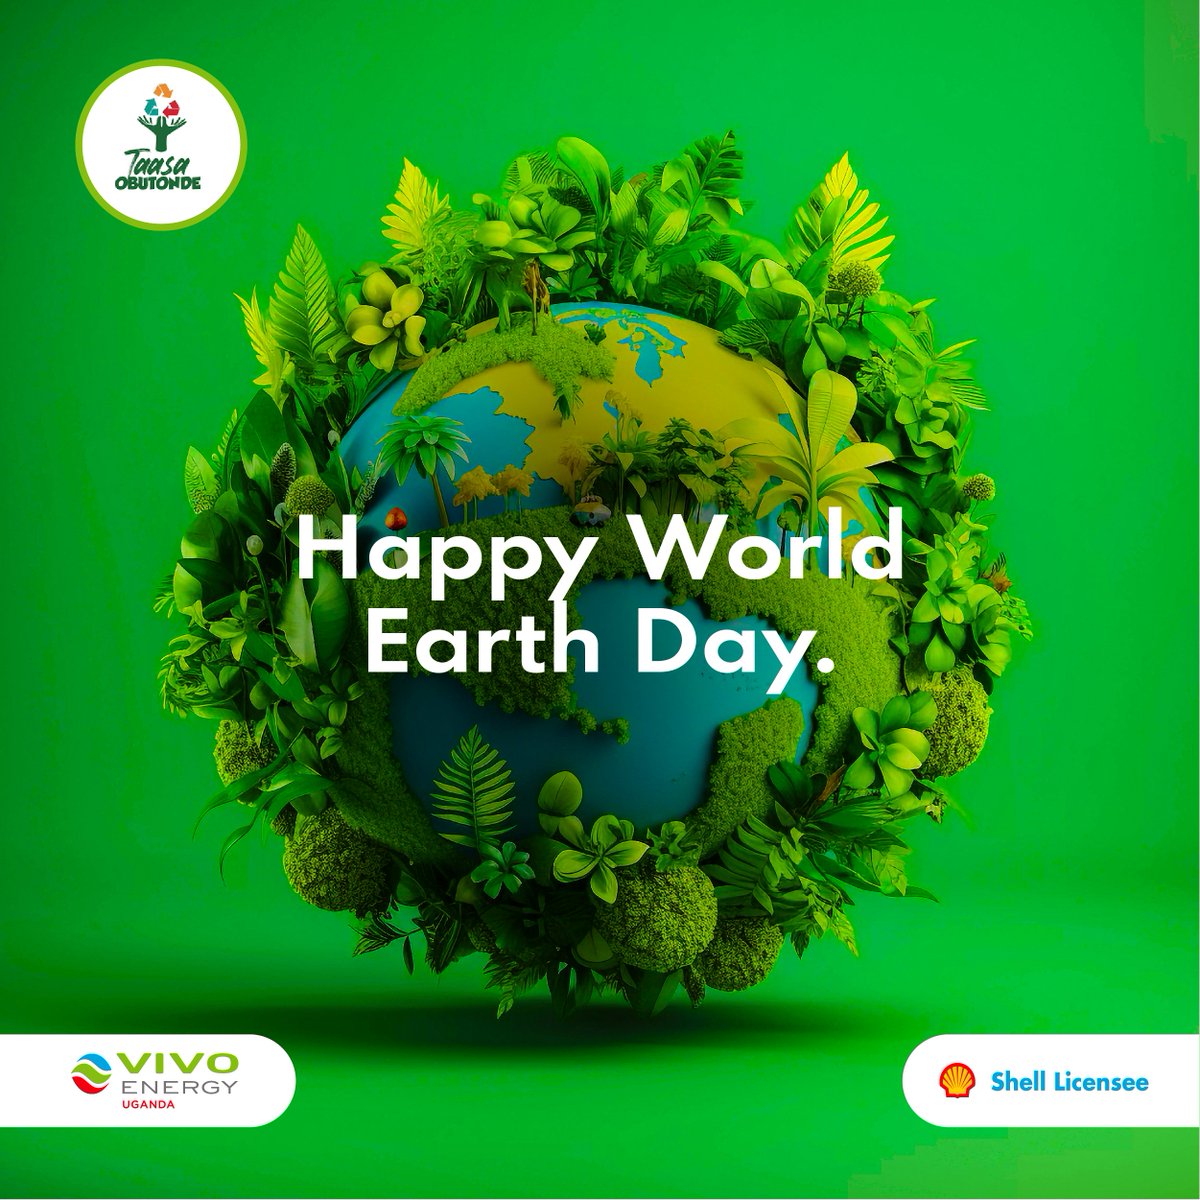 Today, as we celebrate our beautiful planet, let's renew our commitment to sustainability and protecting the environment. At Vivo Energy, we're dedicated to reducing our carbon footprint and promoting eco-friendly practices every day. Together, let's make every day Earth Day by…